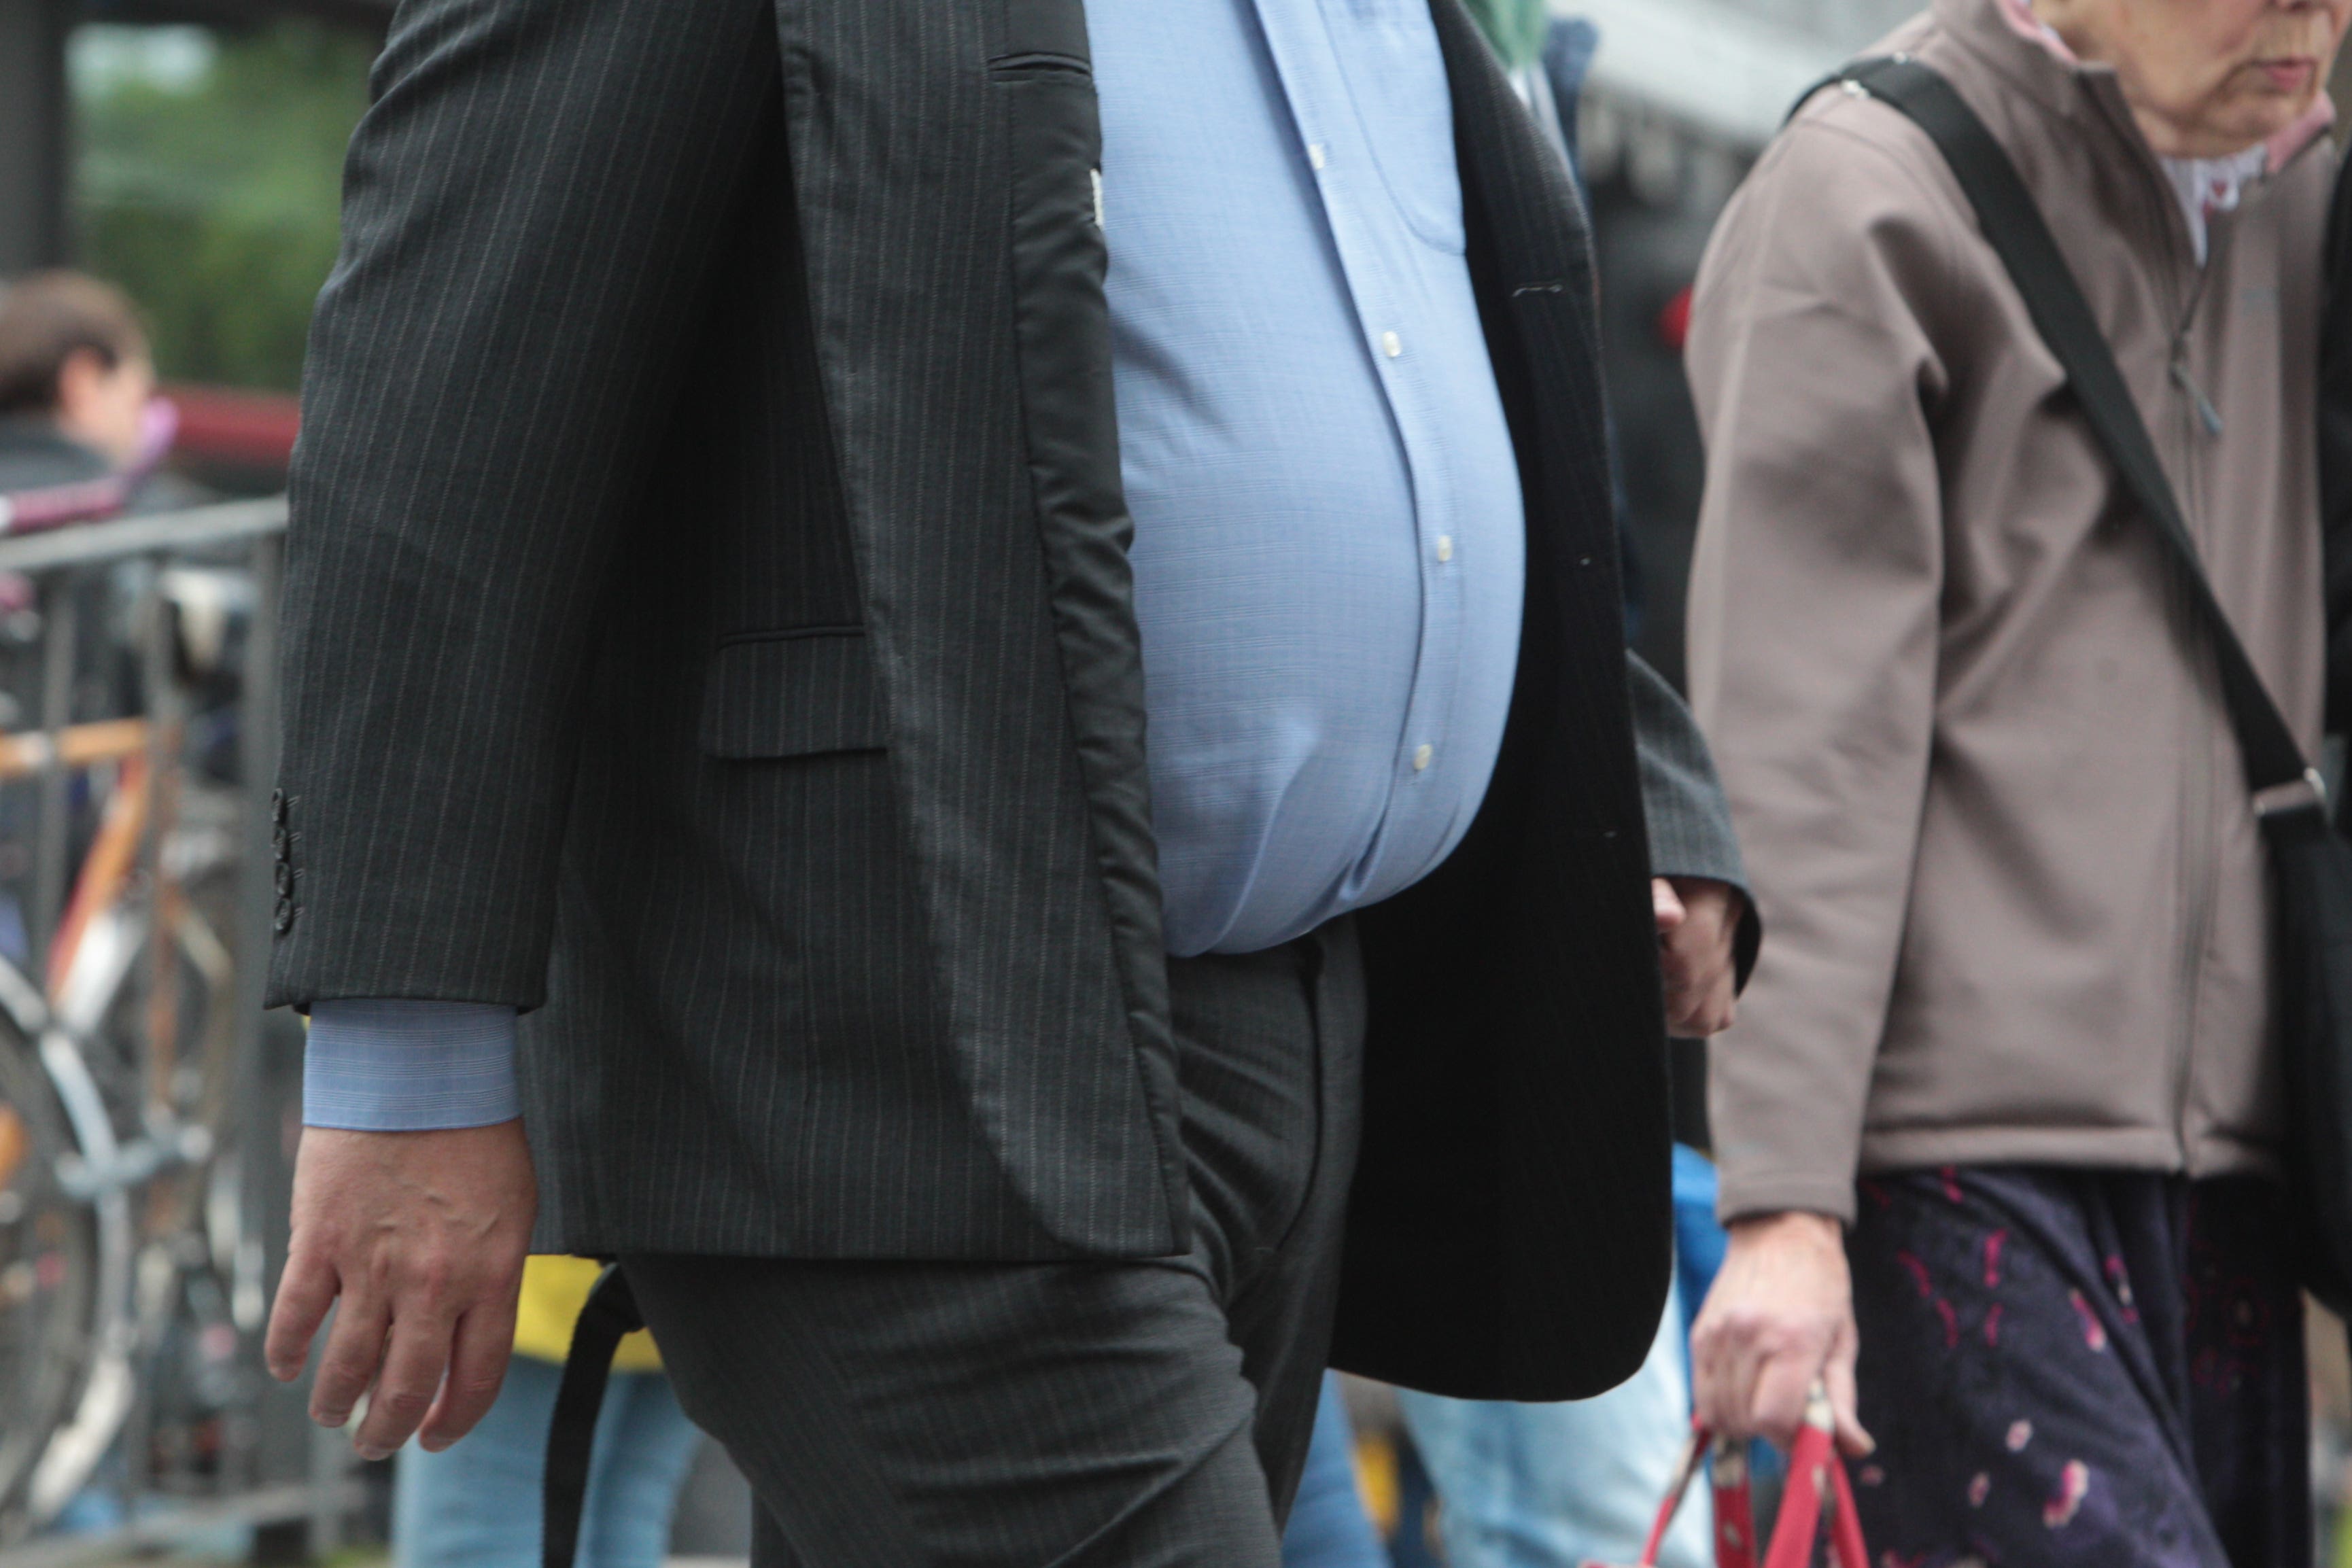 The decline in coronary heart disease rates among people under 60 in the UK has ‘stalled’, with researchers saying this could be down to rising obesity rates and a lack of exercise (Andrew Gray/PA)